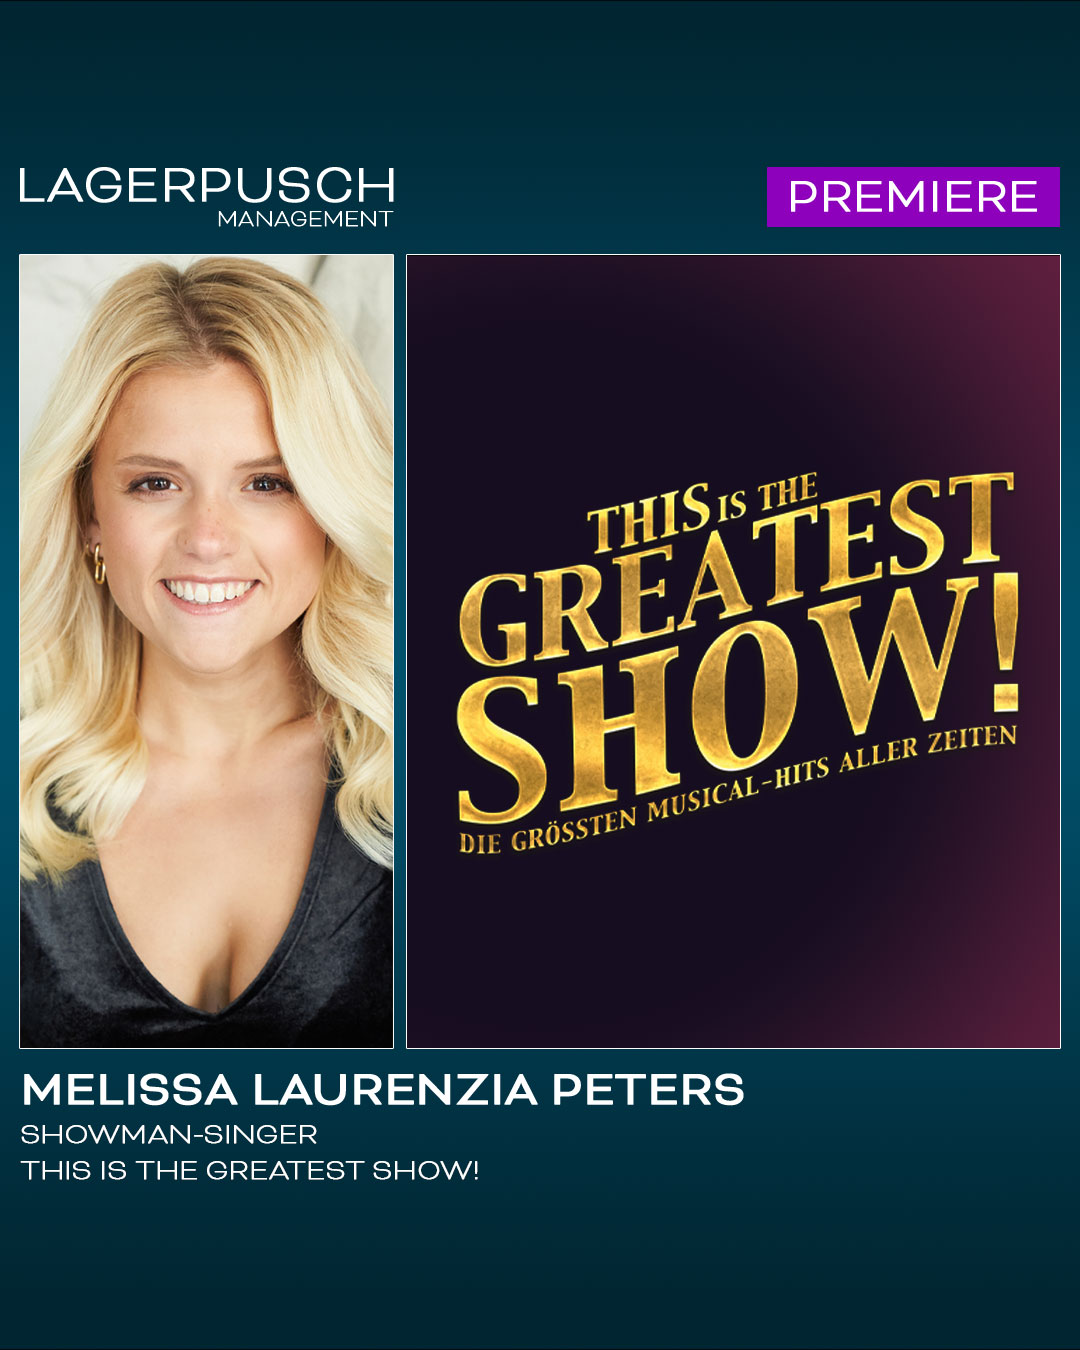 MELISSA LAURENZIA PETERS FEIERT PREMIERE MIT „THIS IS THE GREATEST SHOW“